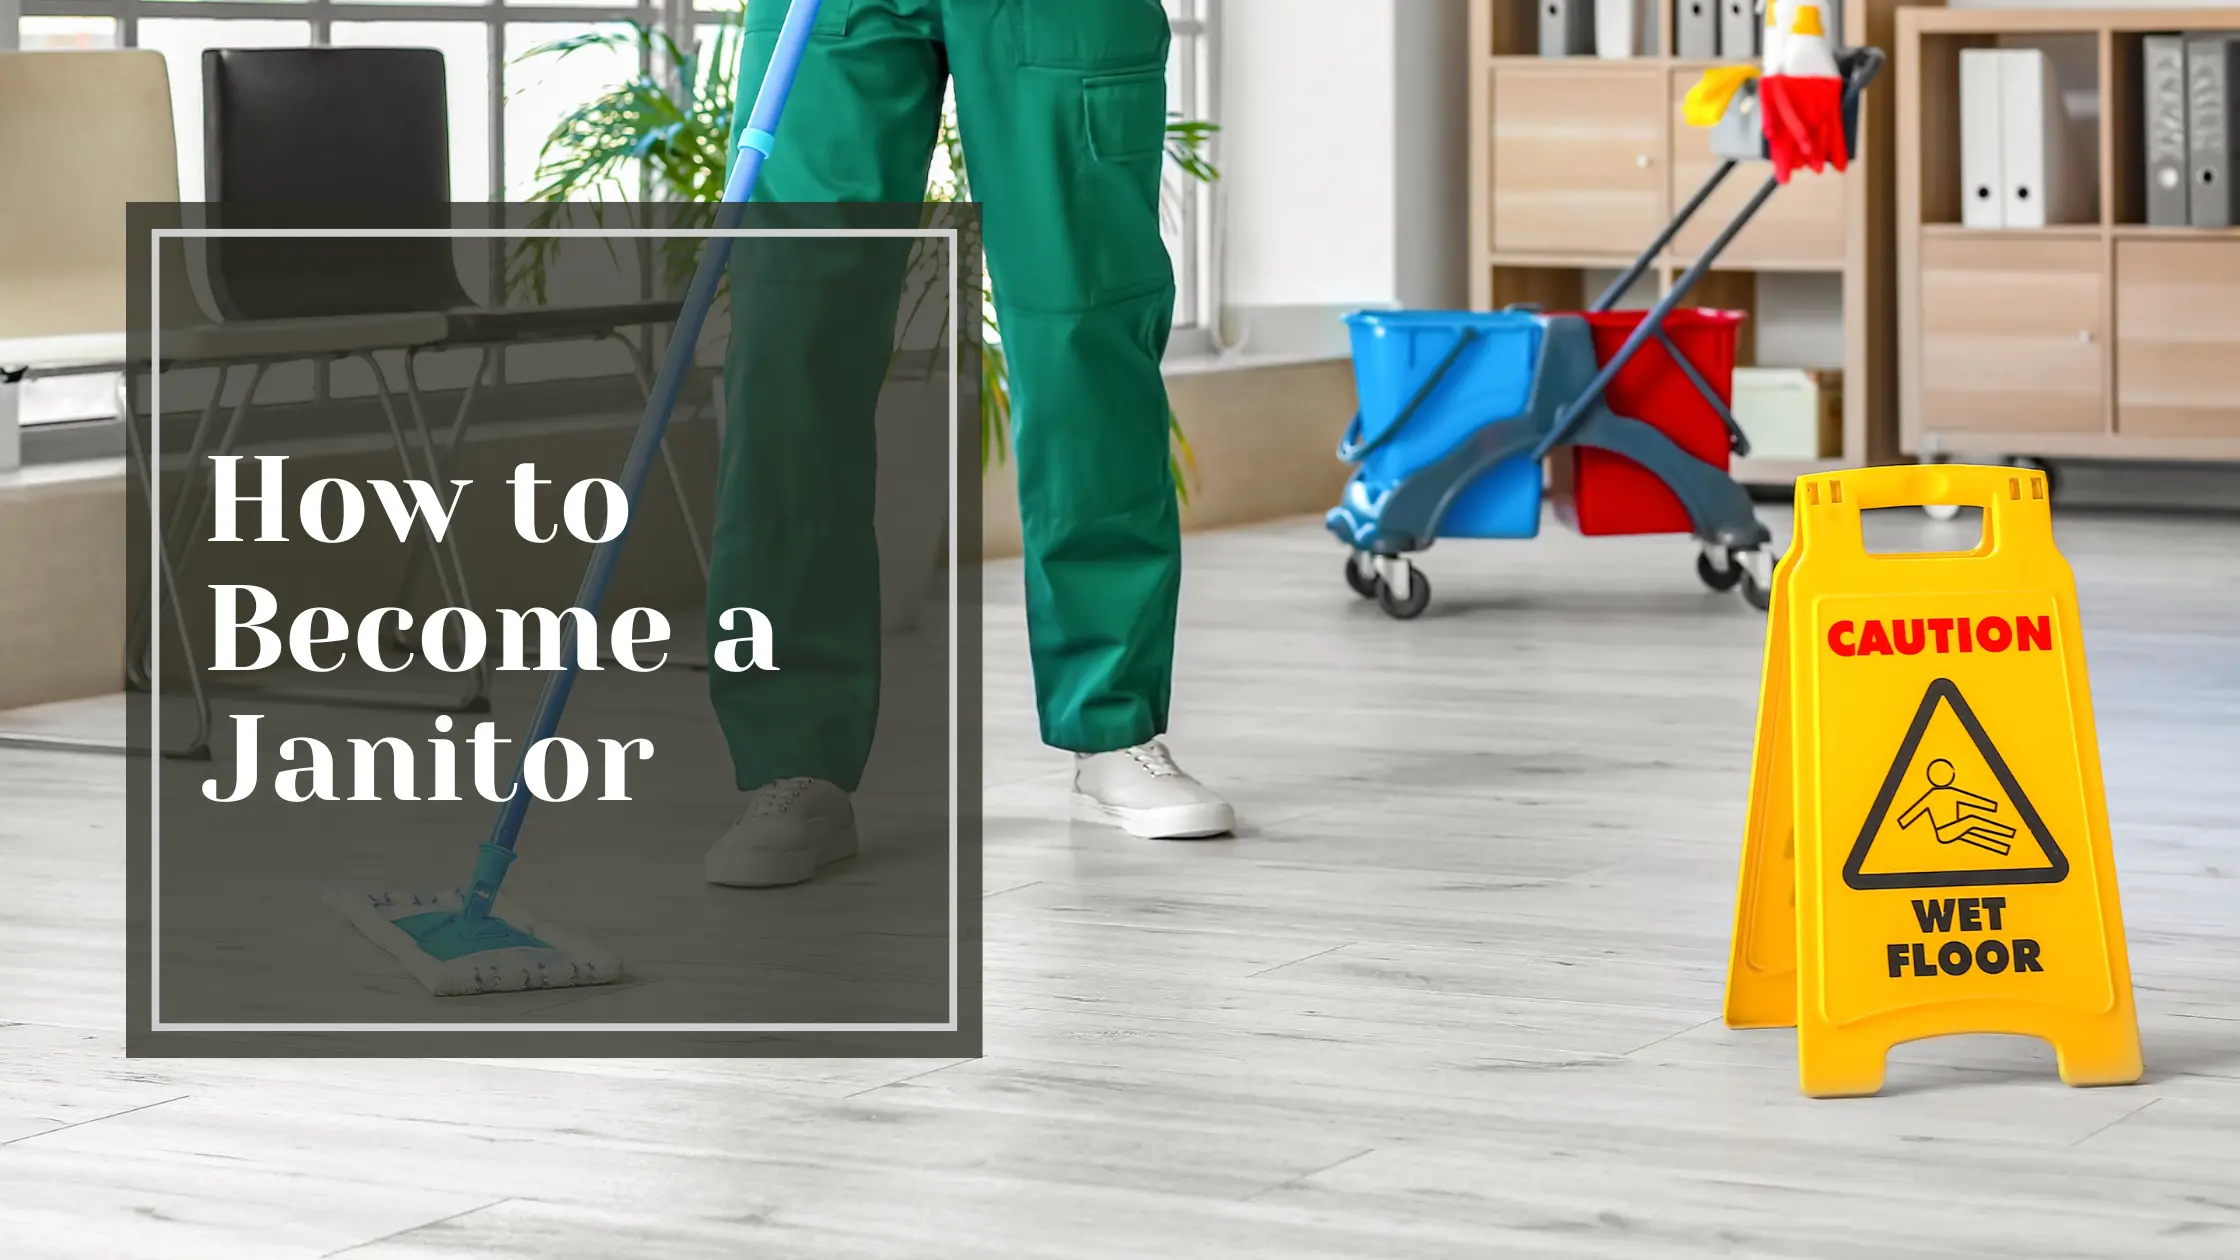 How to Become a Janitor